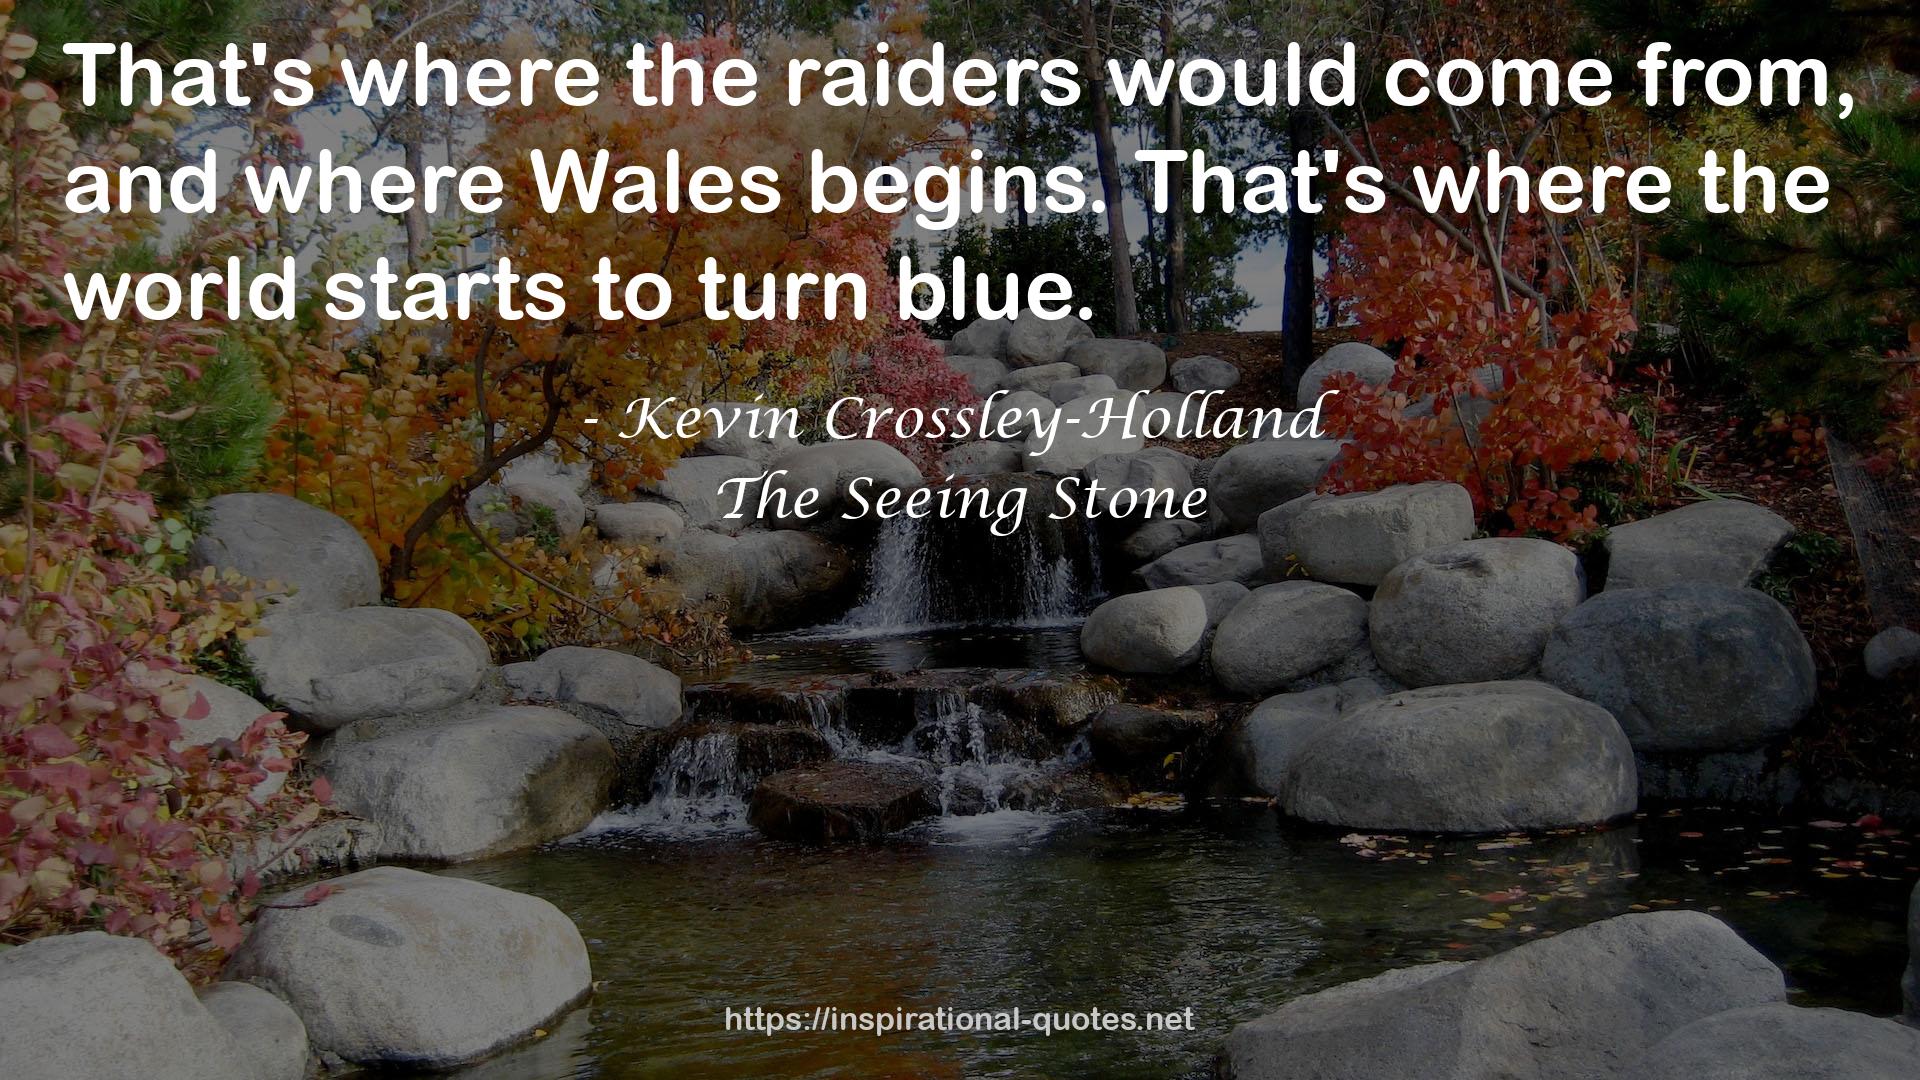 The Seeing Stone QUOTES